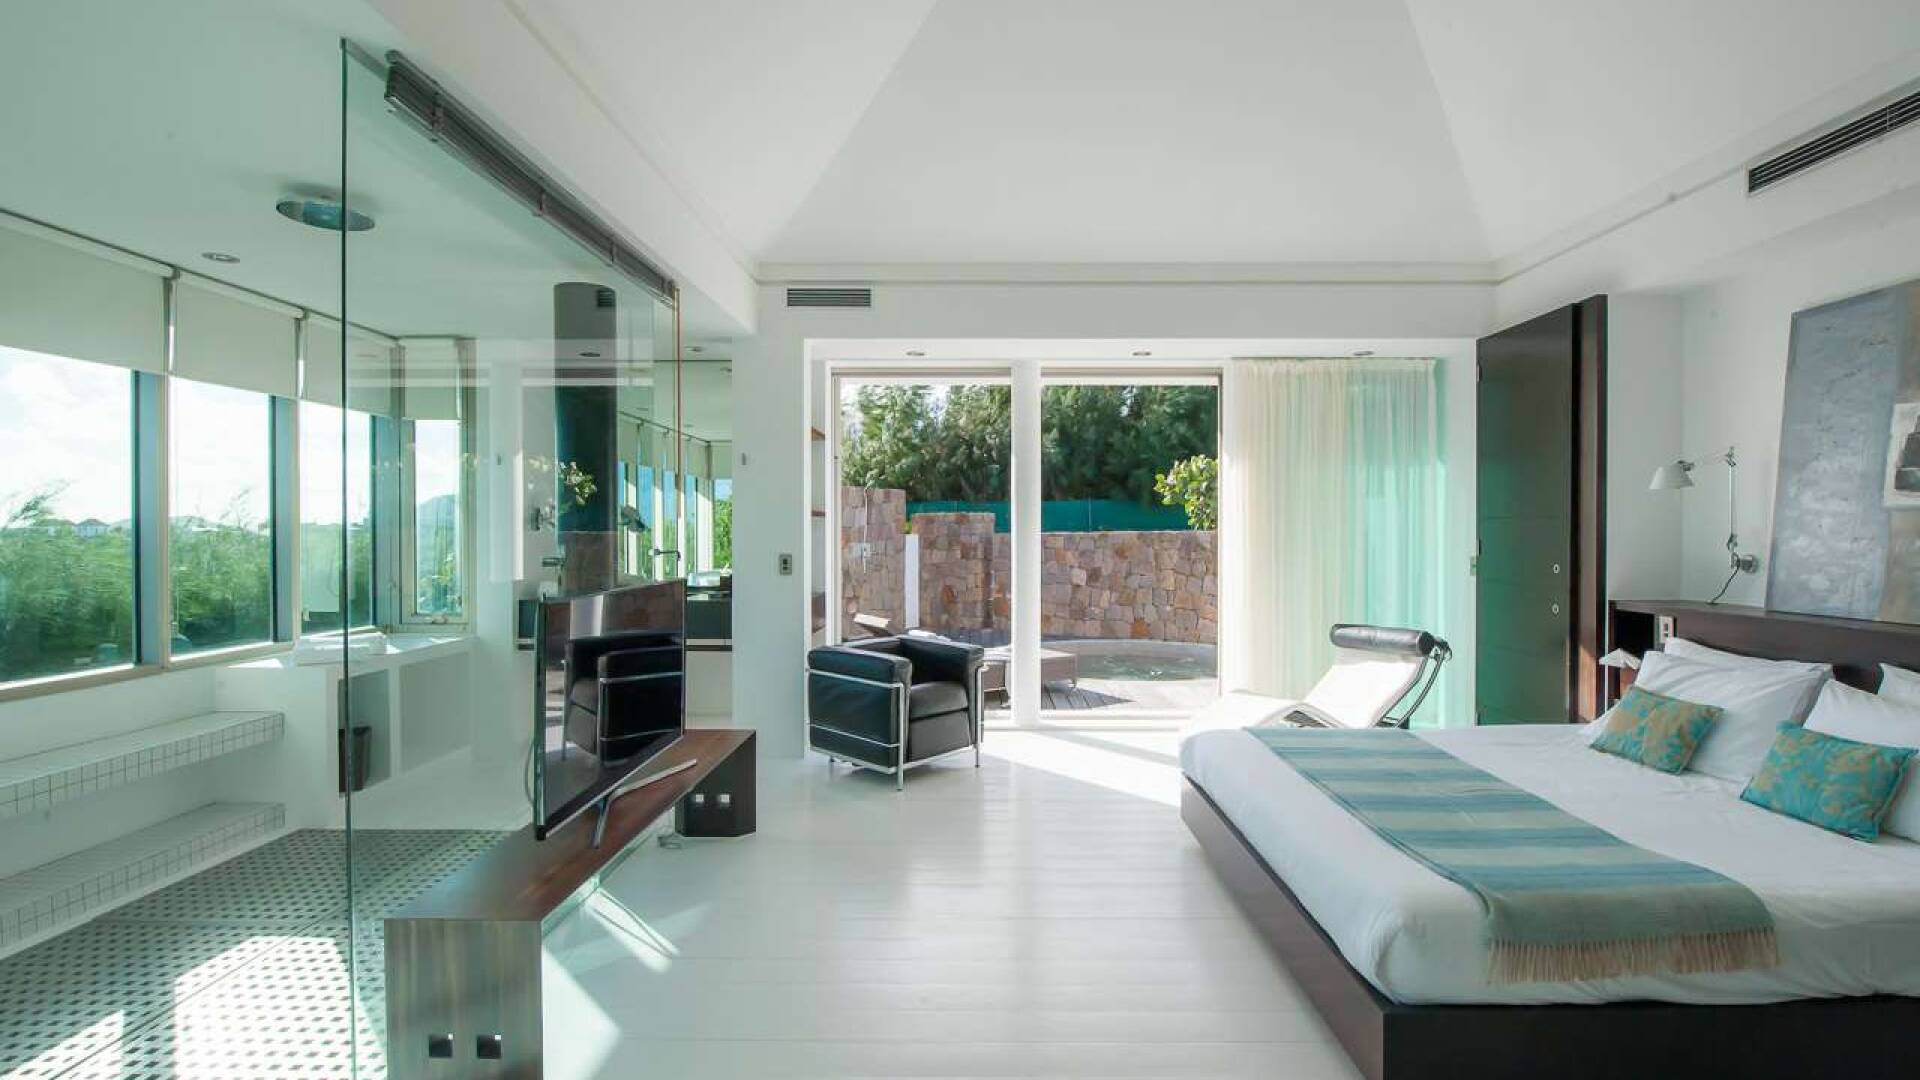 Bedroom at WV PYR, Pointe Milou, St. Barthelemy